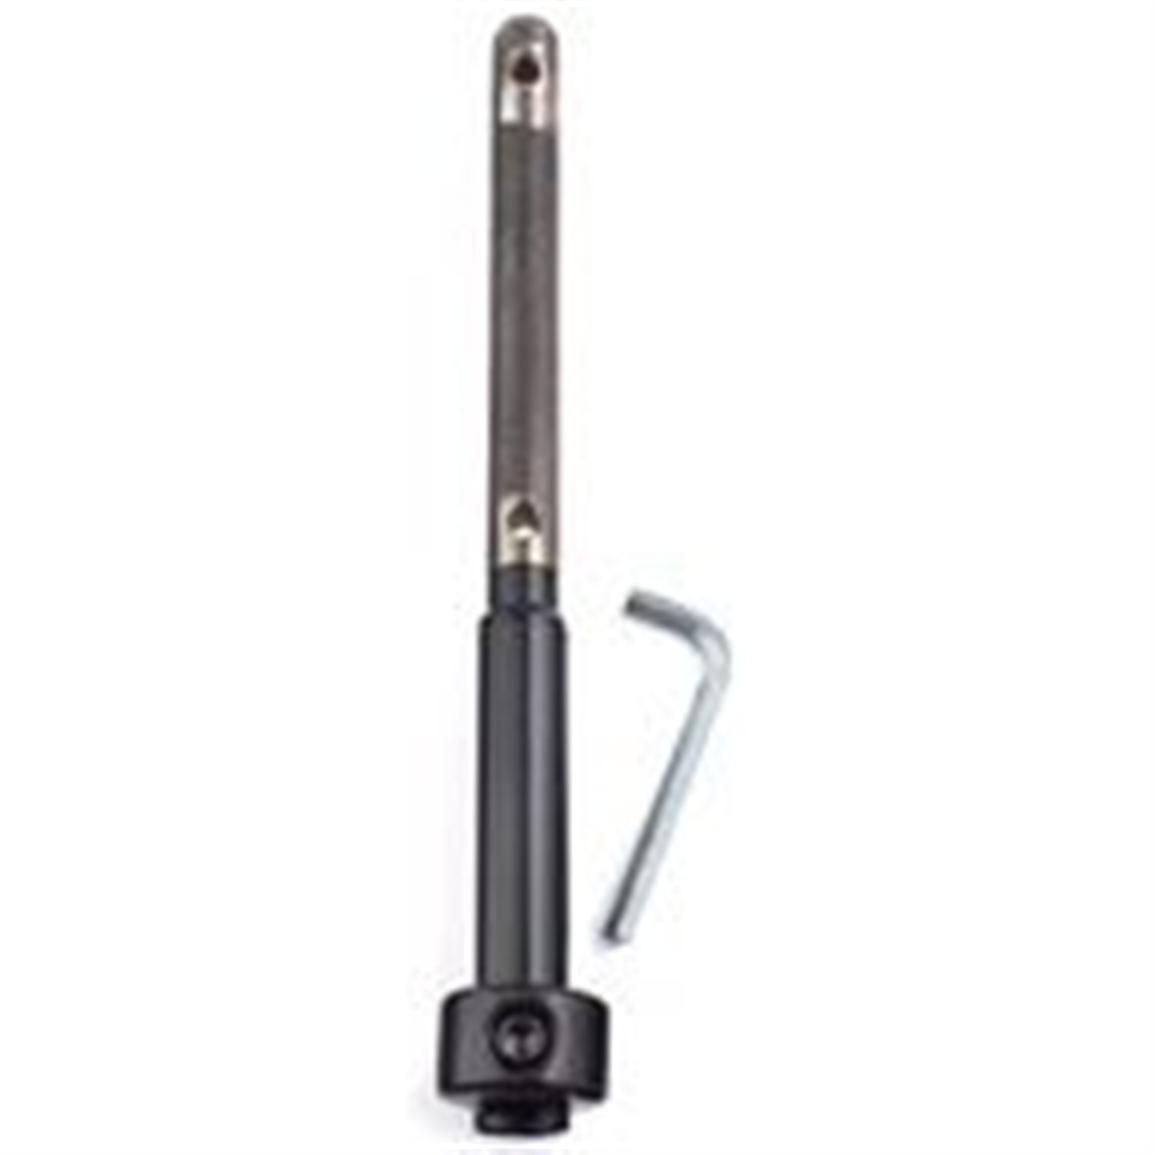 Jiffy® 6 foot to 12 inch Adjustable Shafts